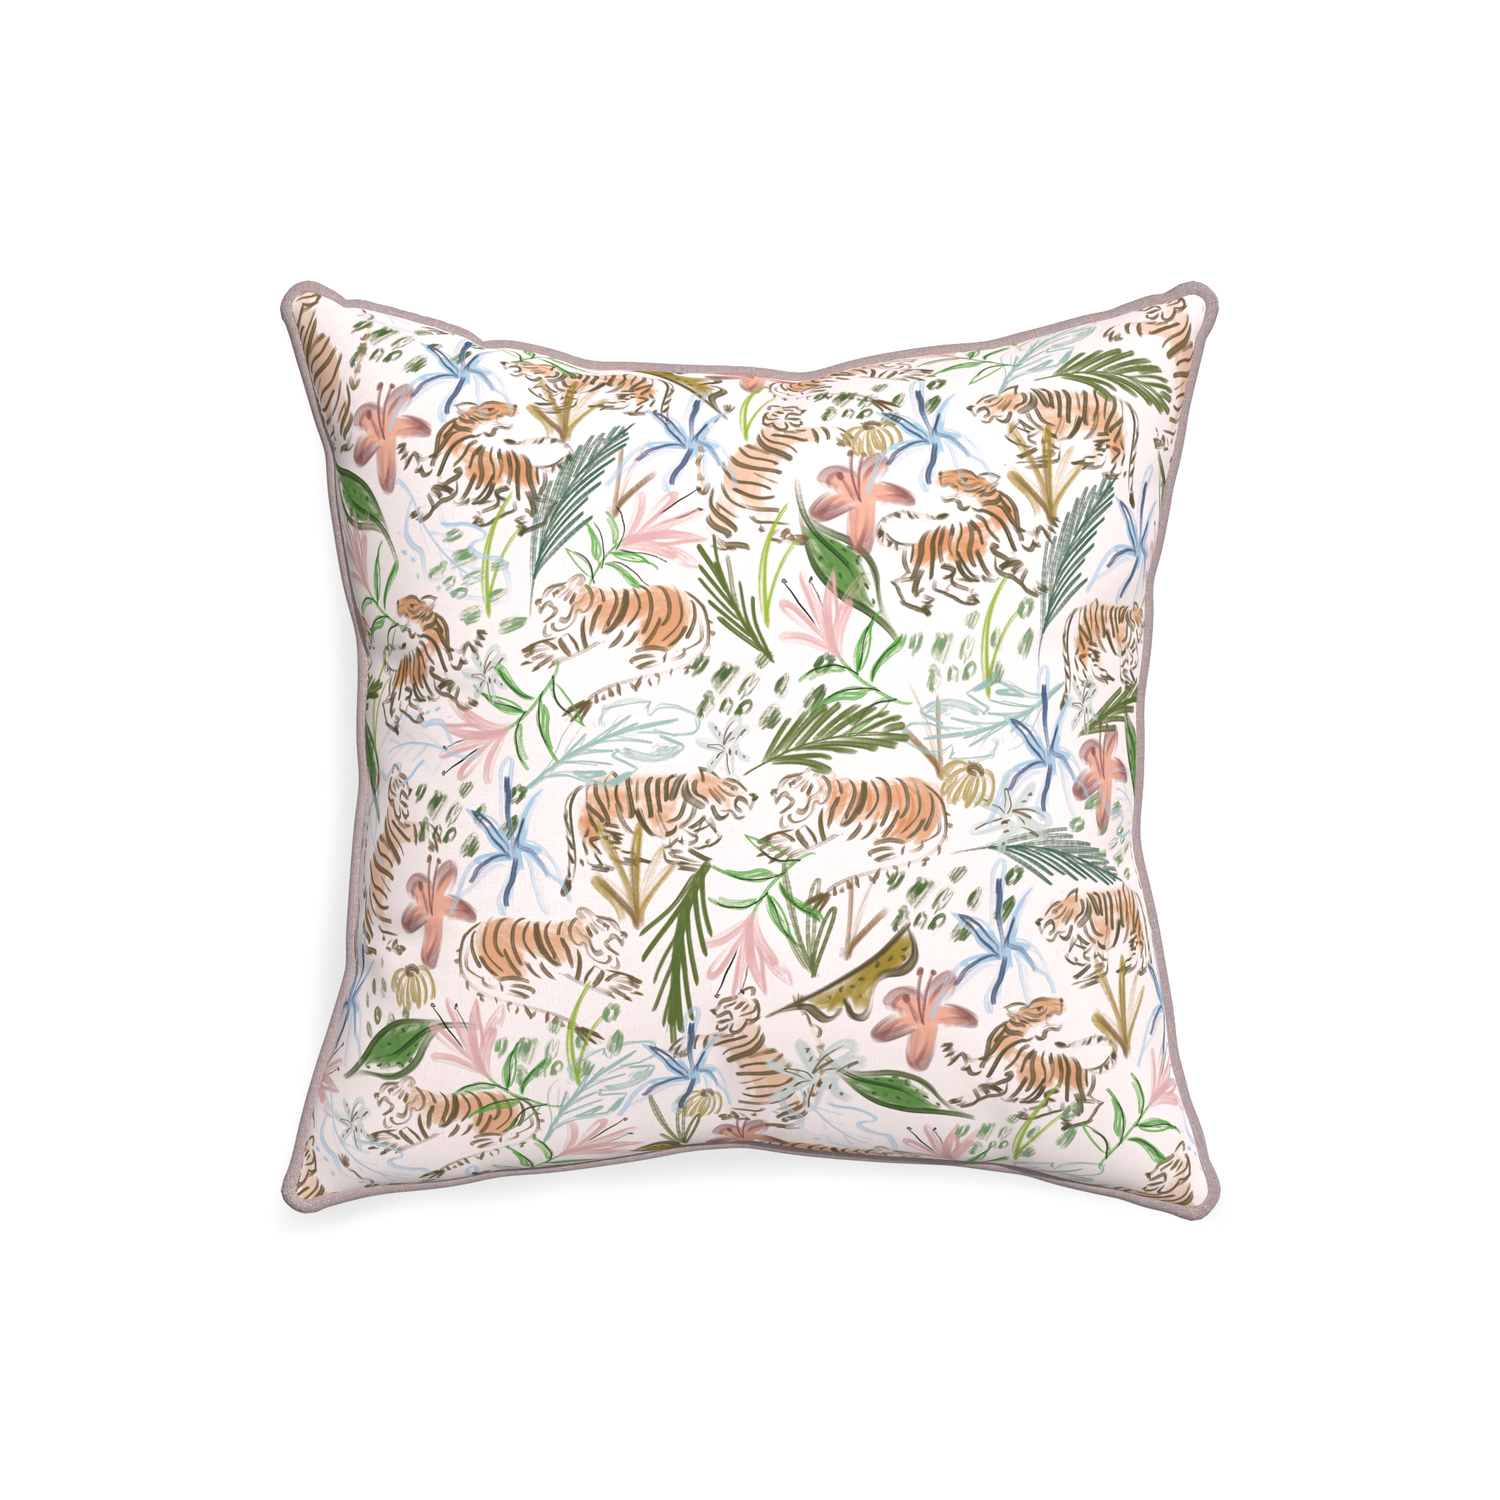 20-square frida pink custom pink chinoiserie tigerpillow with orchid piping on white background